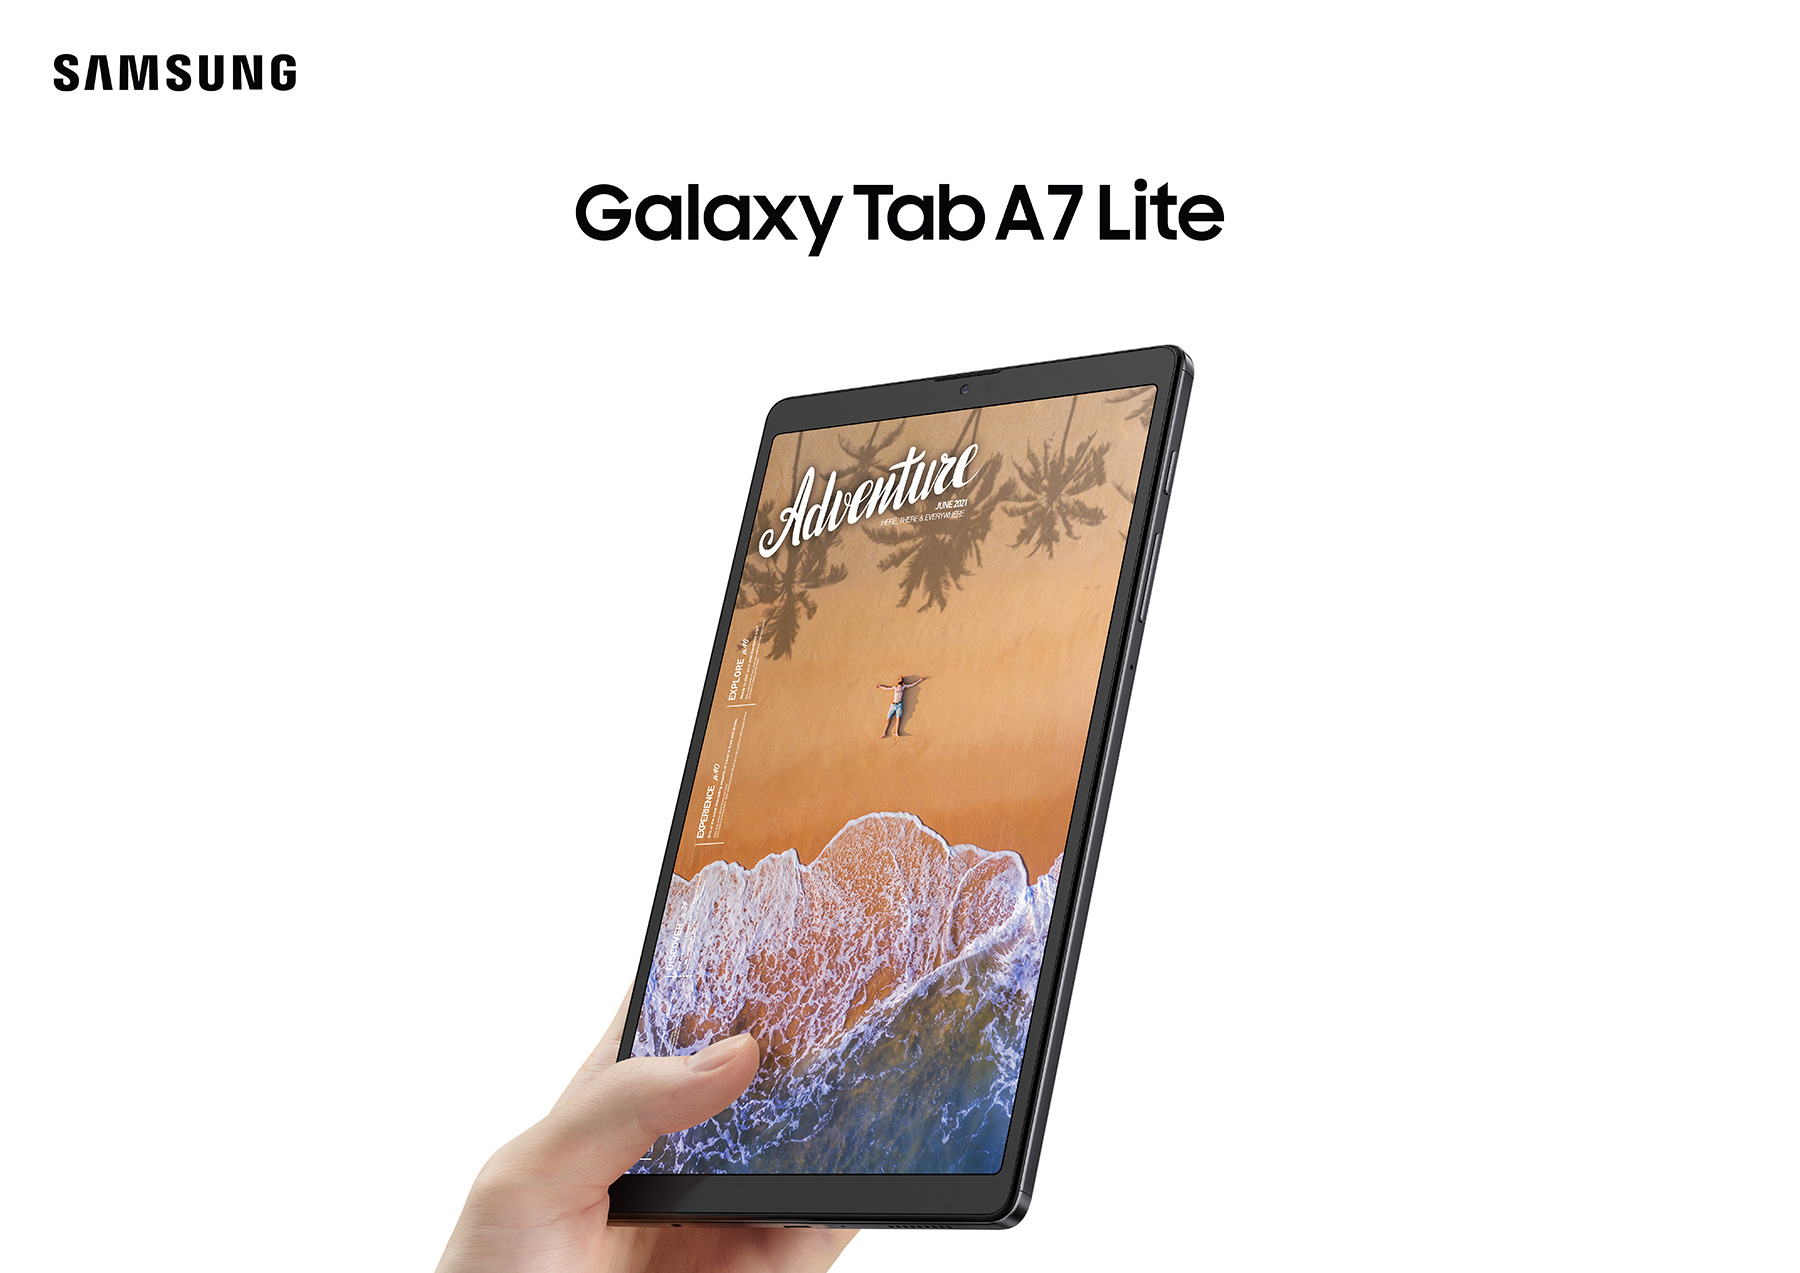 image of a hand holding a Samsung Galaxy Tab A7 Lite